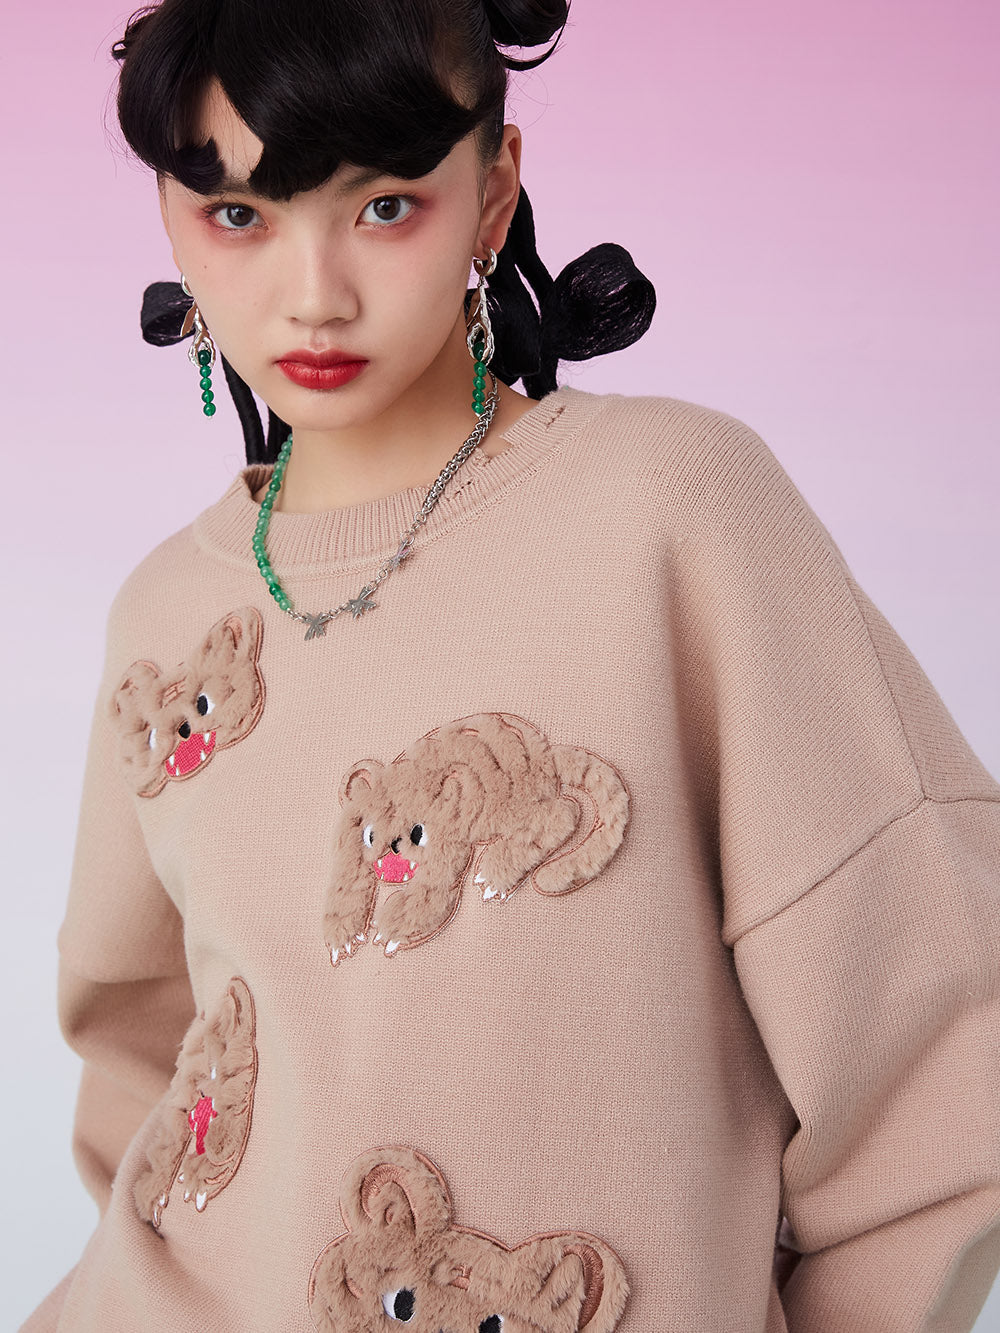 MUKZIN Knit Patched Irregular Brown Sweater CNY “year of the tiger” Edition